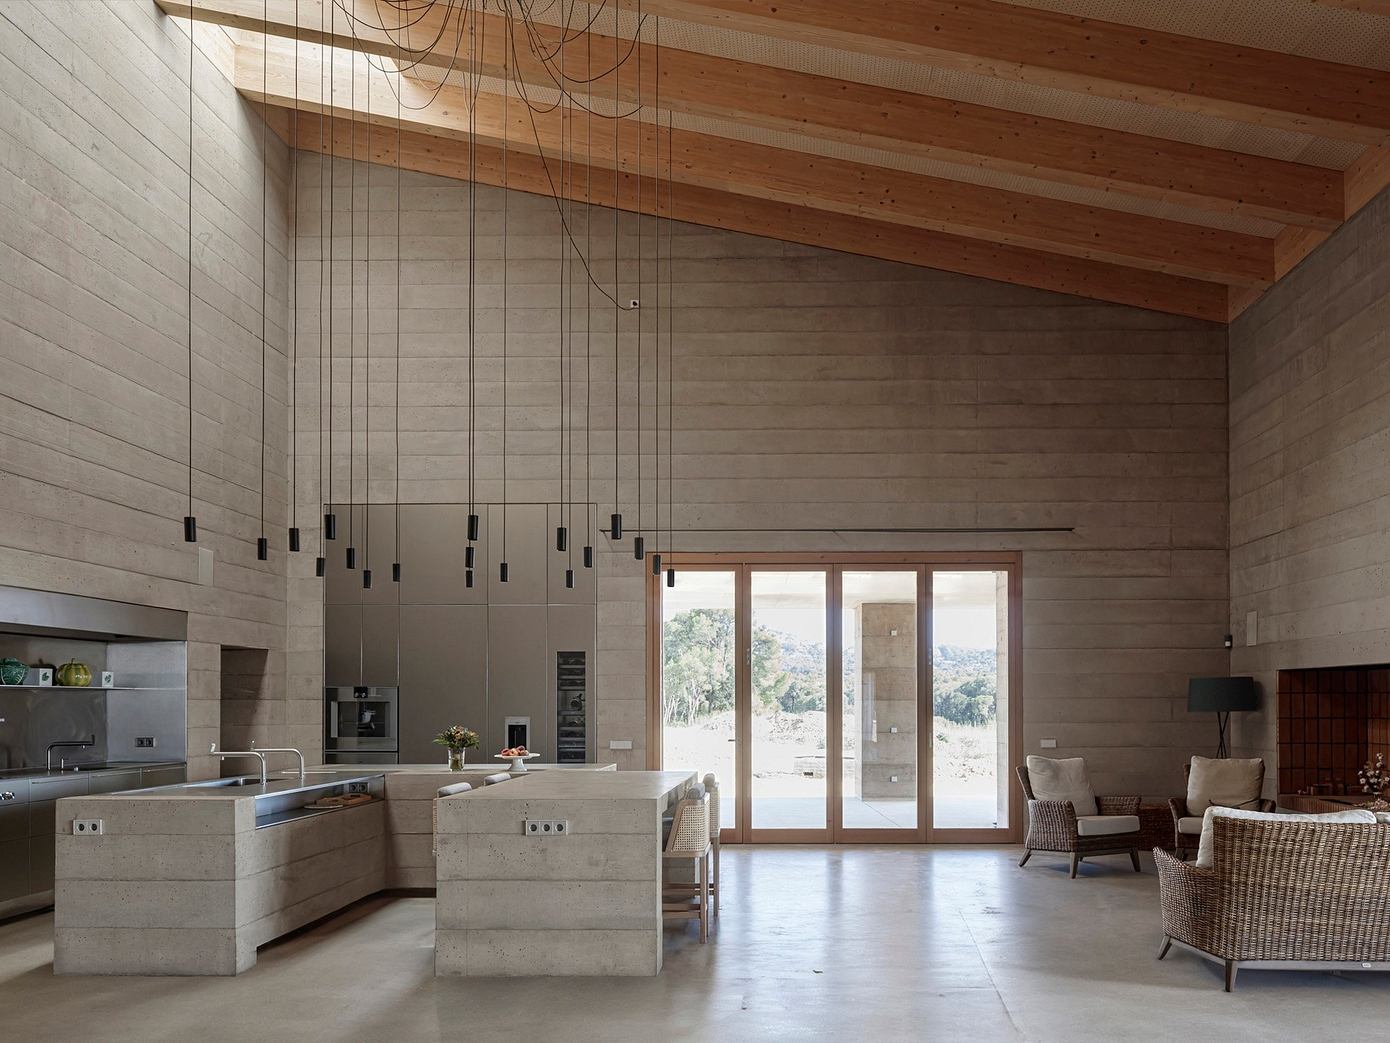 House 1627: A Farmhouse Reborn – Honoring Tradition in Spain